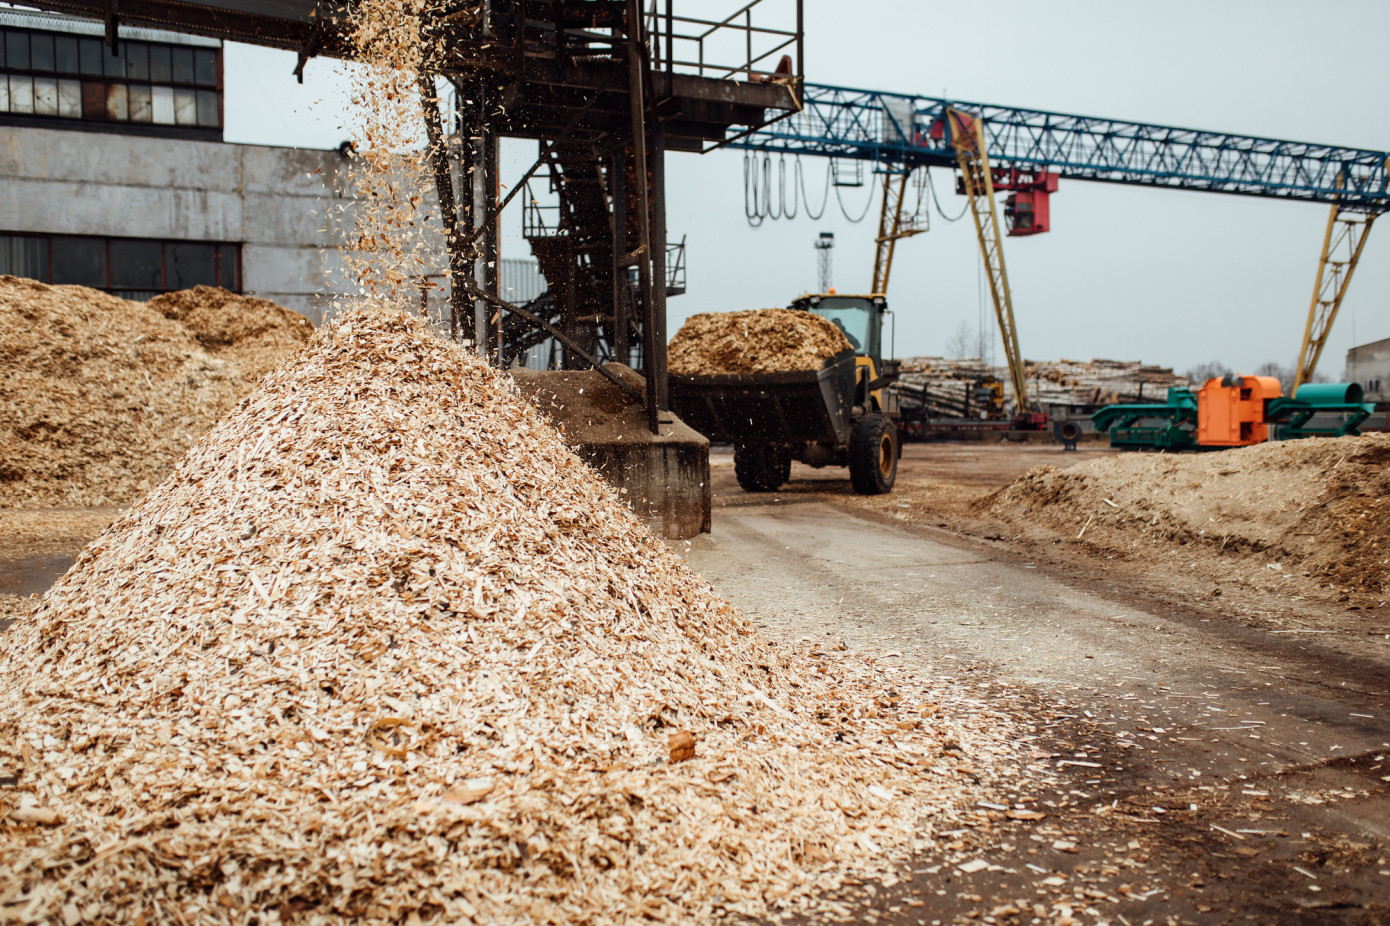 Exports of wood chips from Australia to China decrease 41% in April